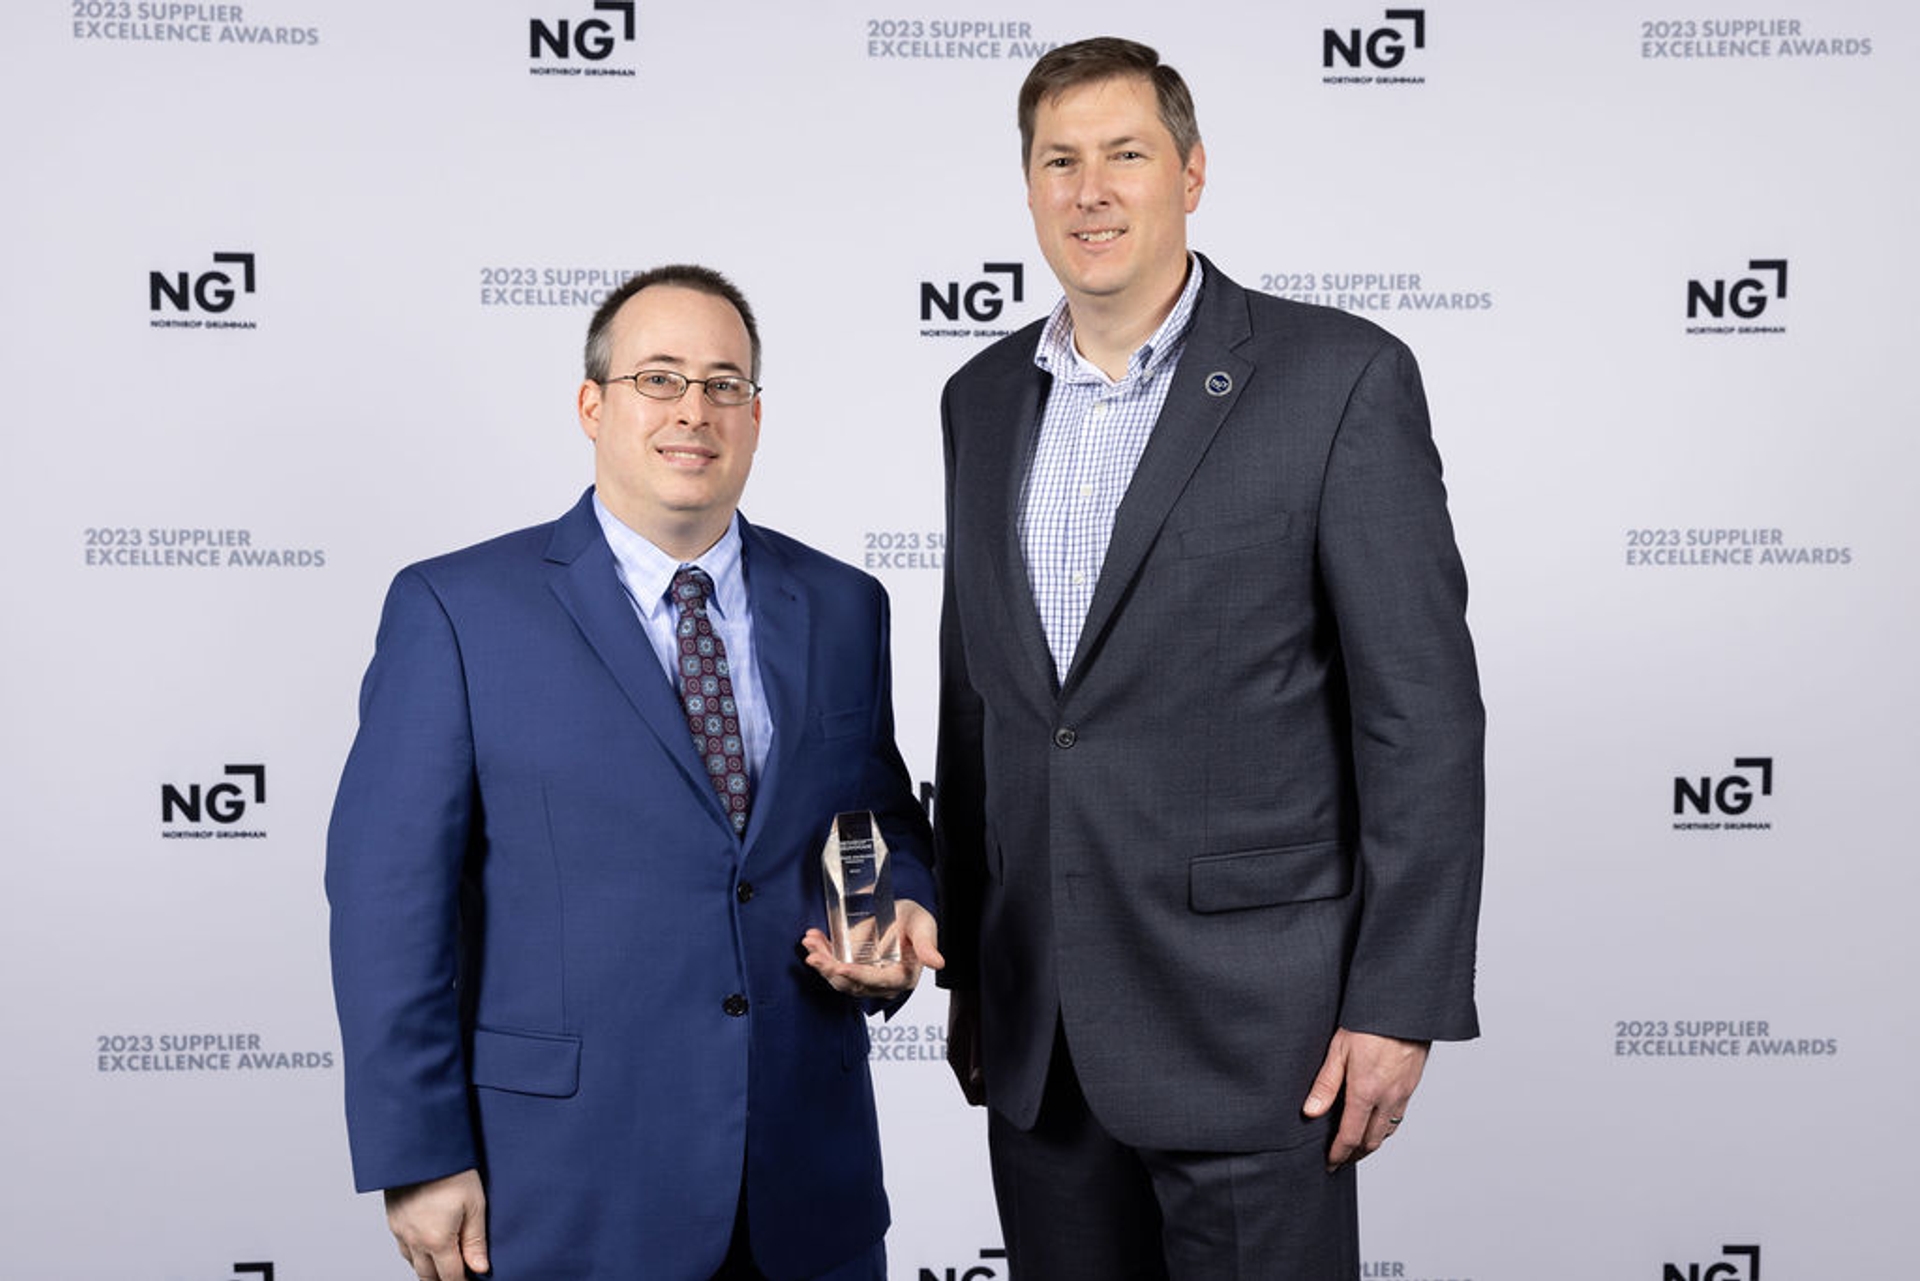 Shyft CEO, Justin Worrell, and NG VP Global Supply Chain and Infrastructure, Jesse B. Walker